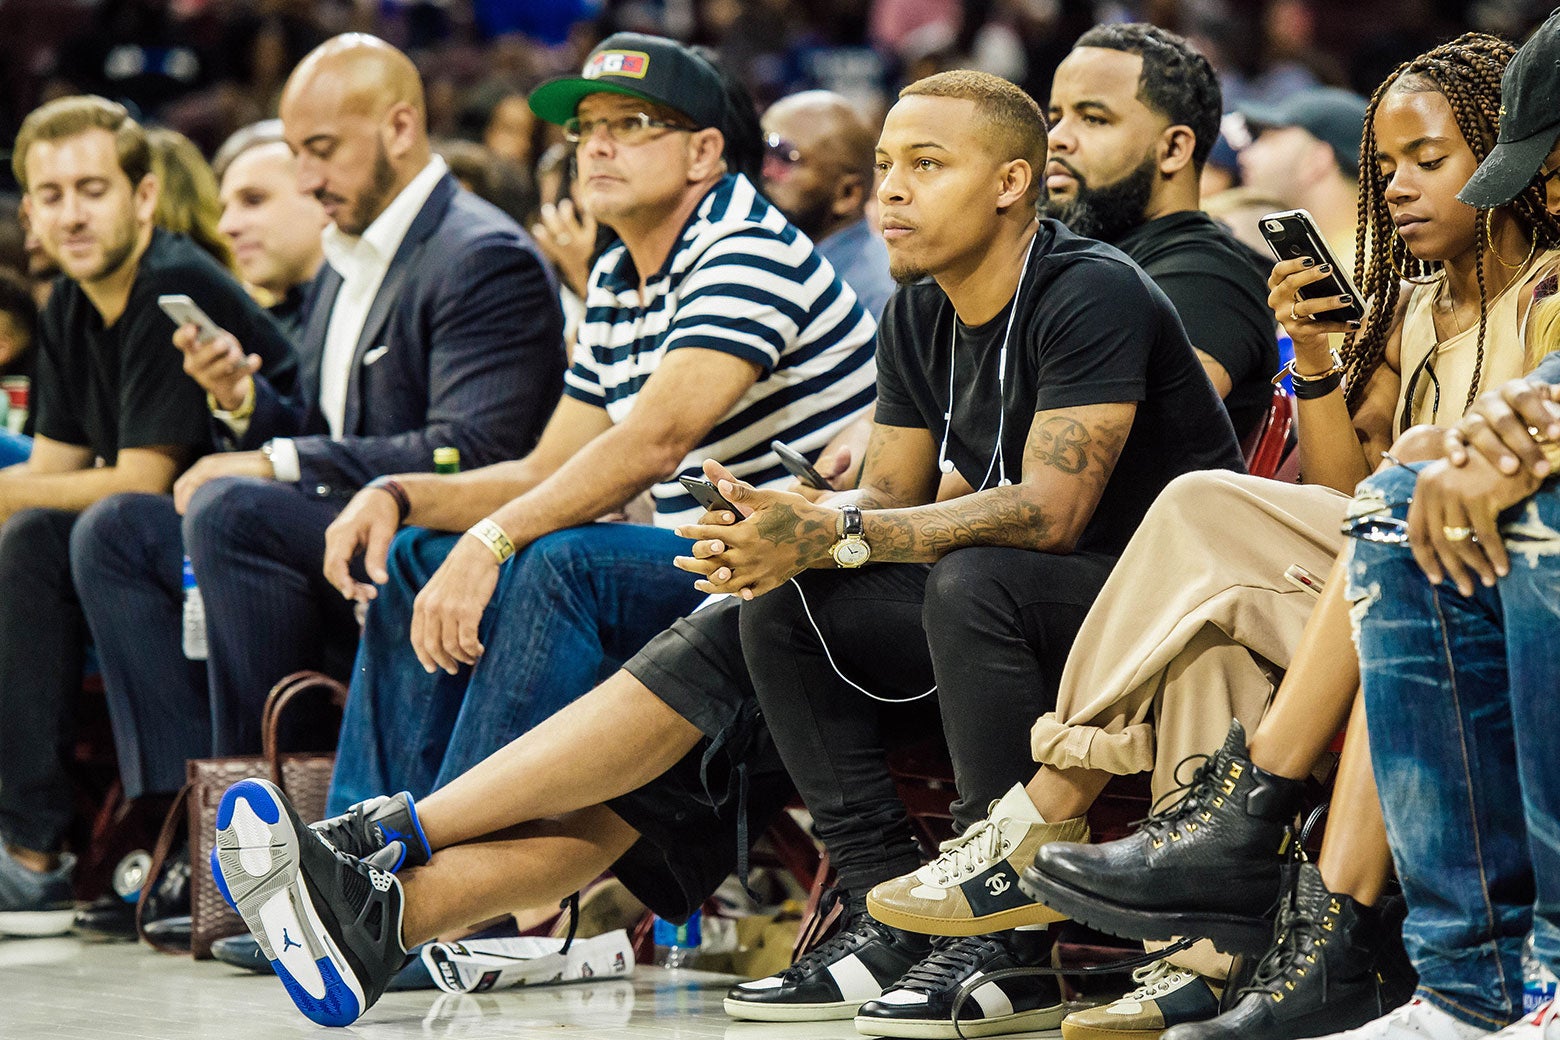 Actor / rapper Bow Wow looks on during a BIG3 Basketball league game on July 16, 2017 at Wells Fargo Center in Philadelphia.